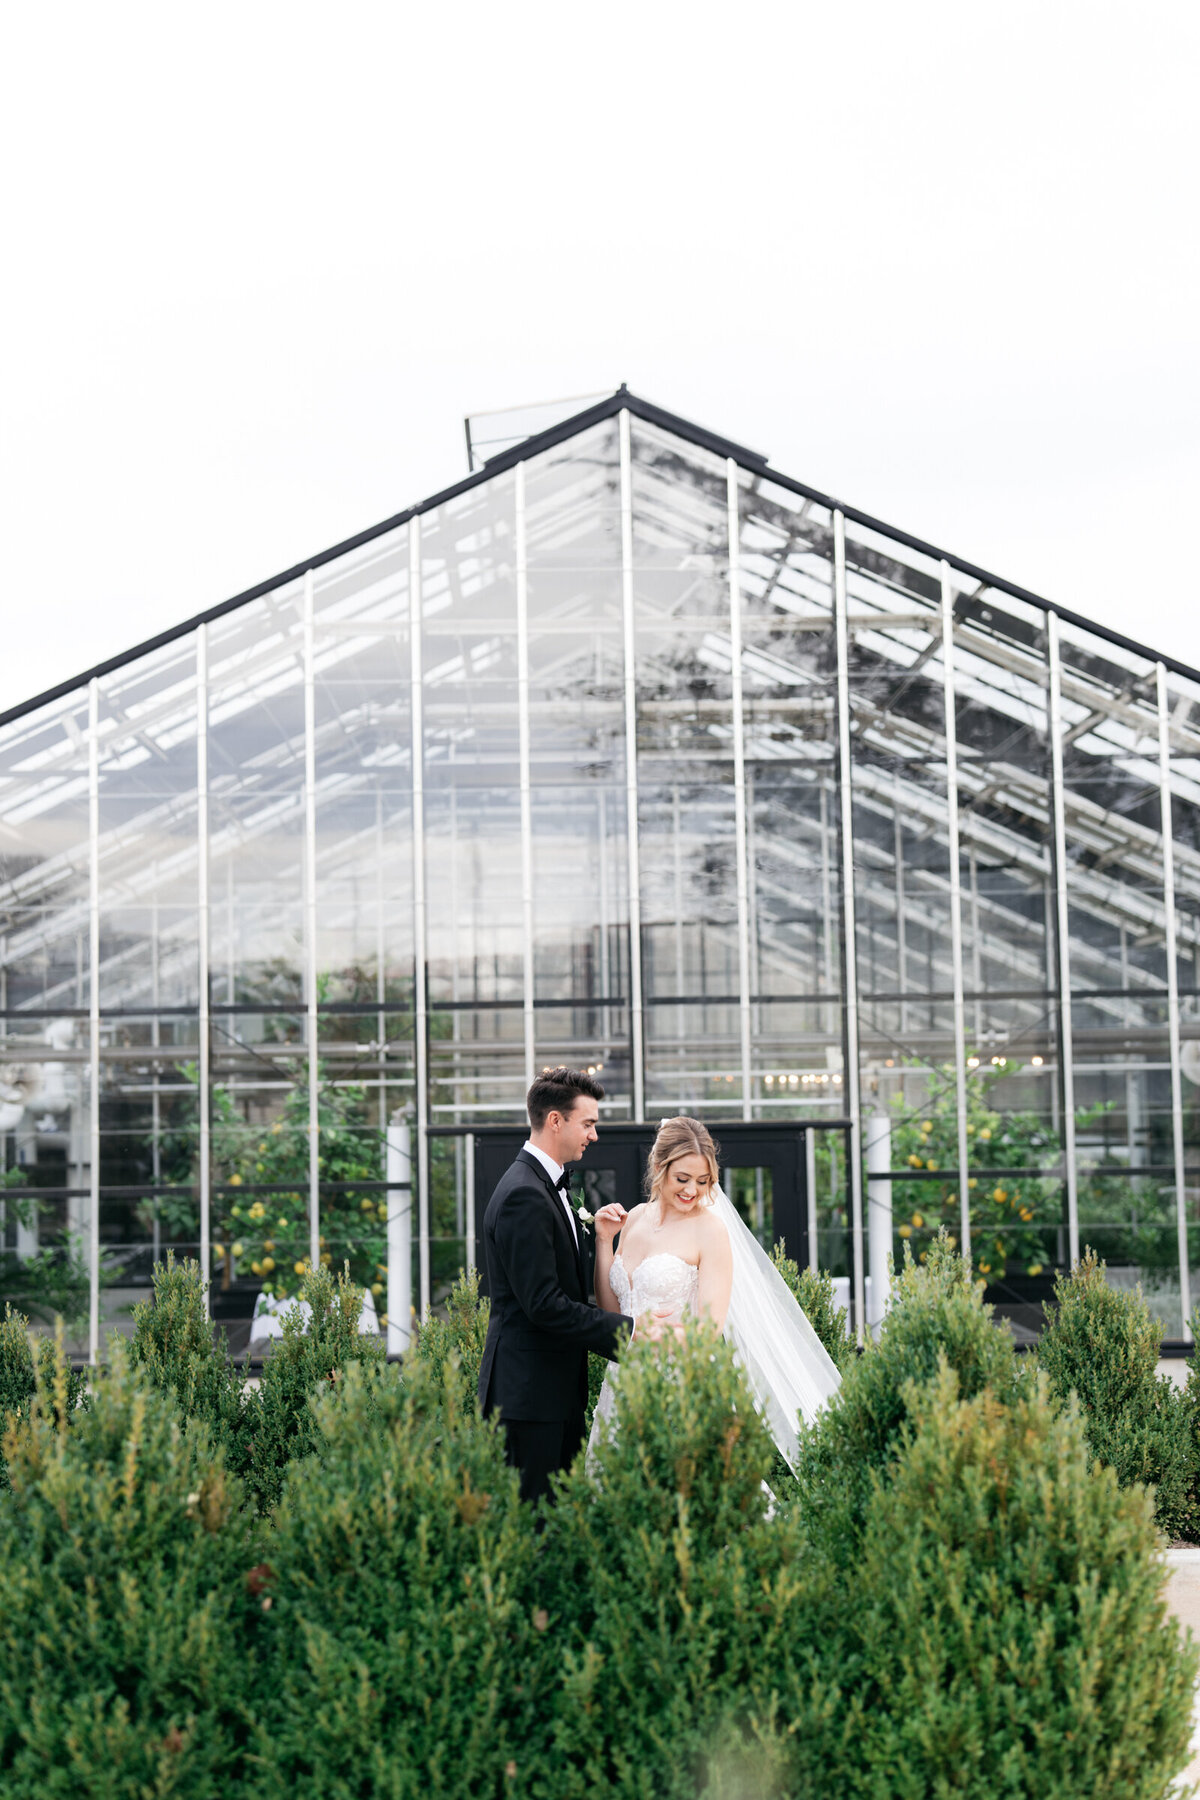 bride and groom posing together in front of a greenhouse